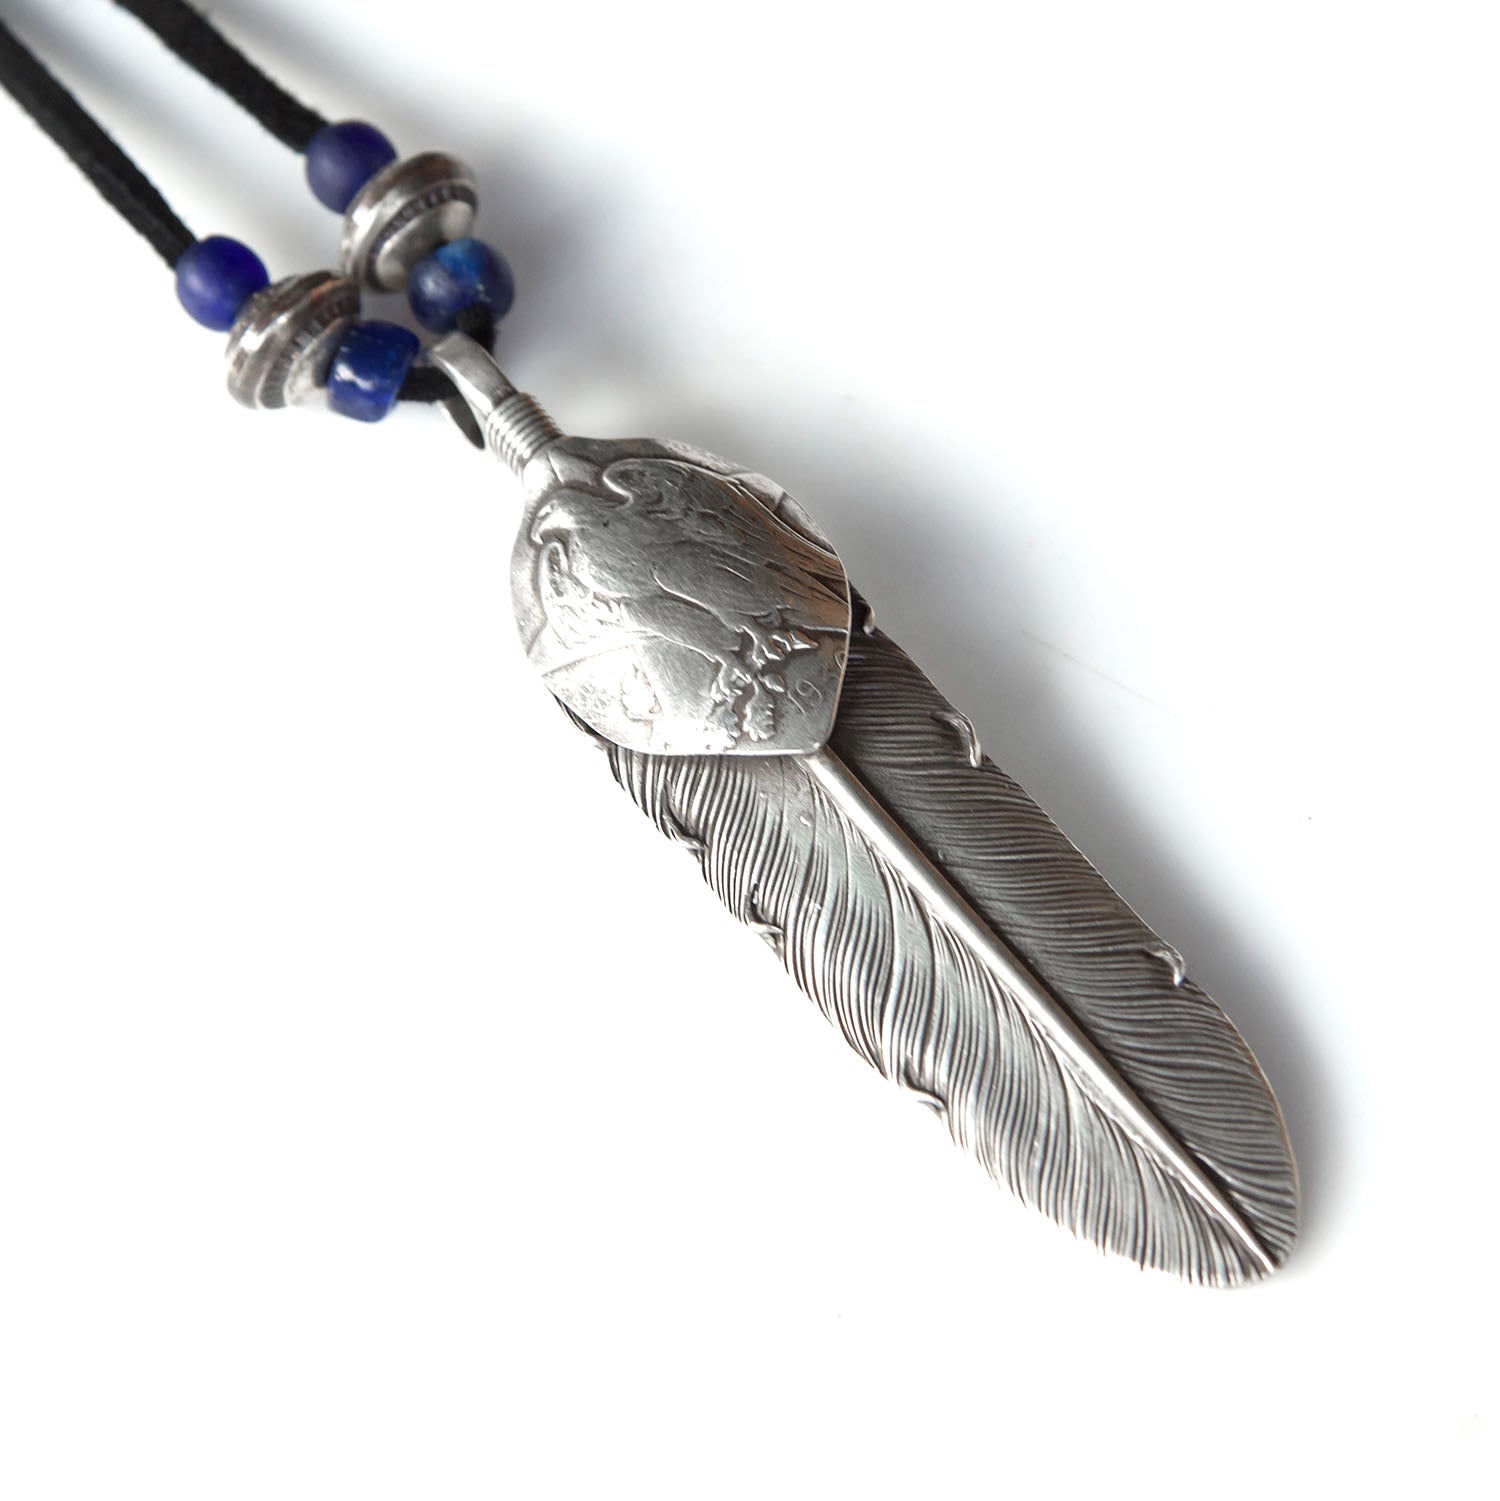 SPECIAL PEACE FEATHER with TEXAS CENTENNIAL HEART - May club